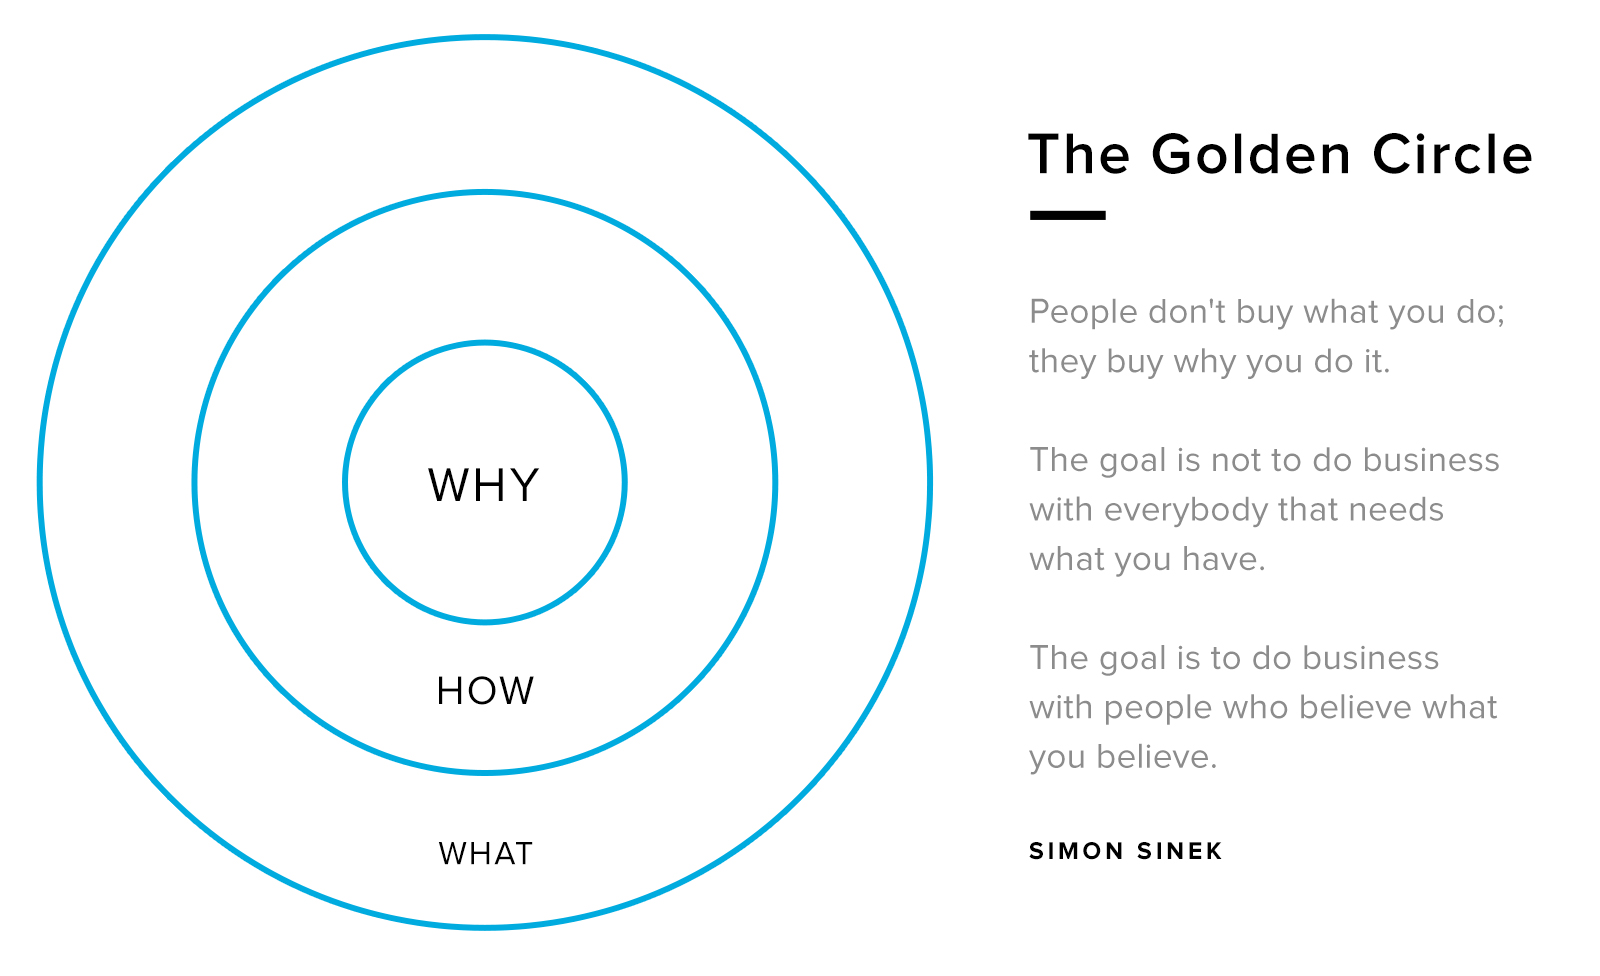 An infographic about The Golden Circle.